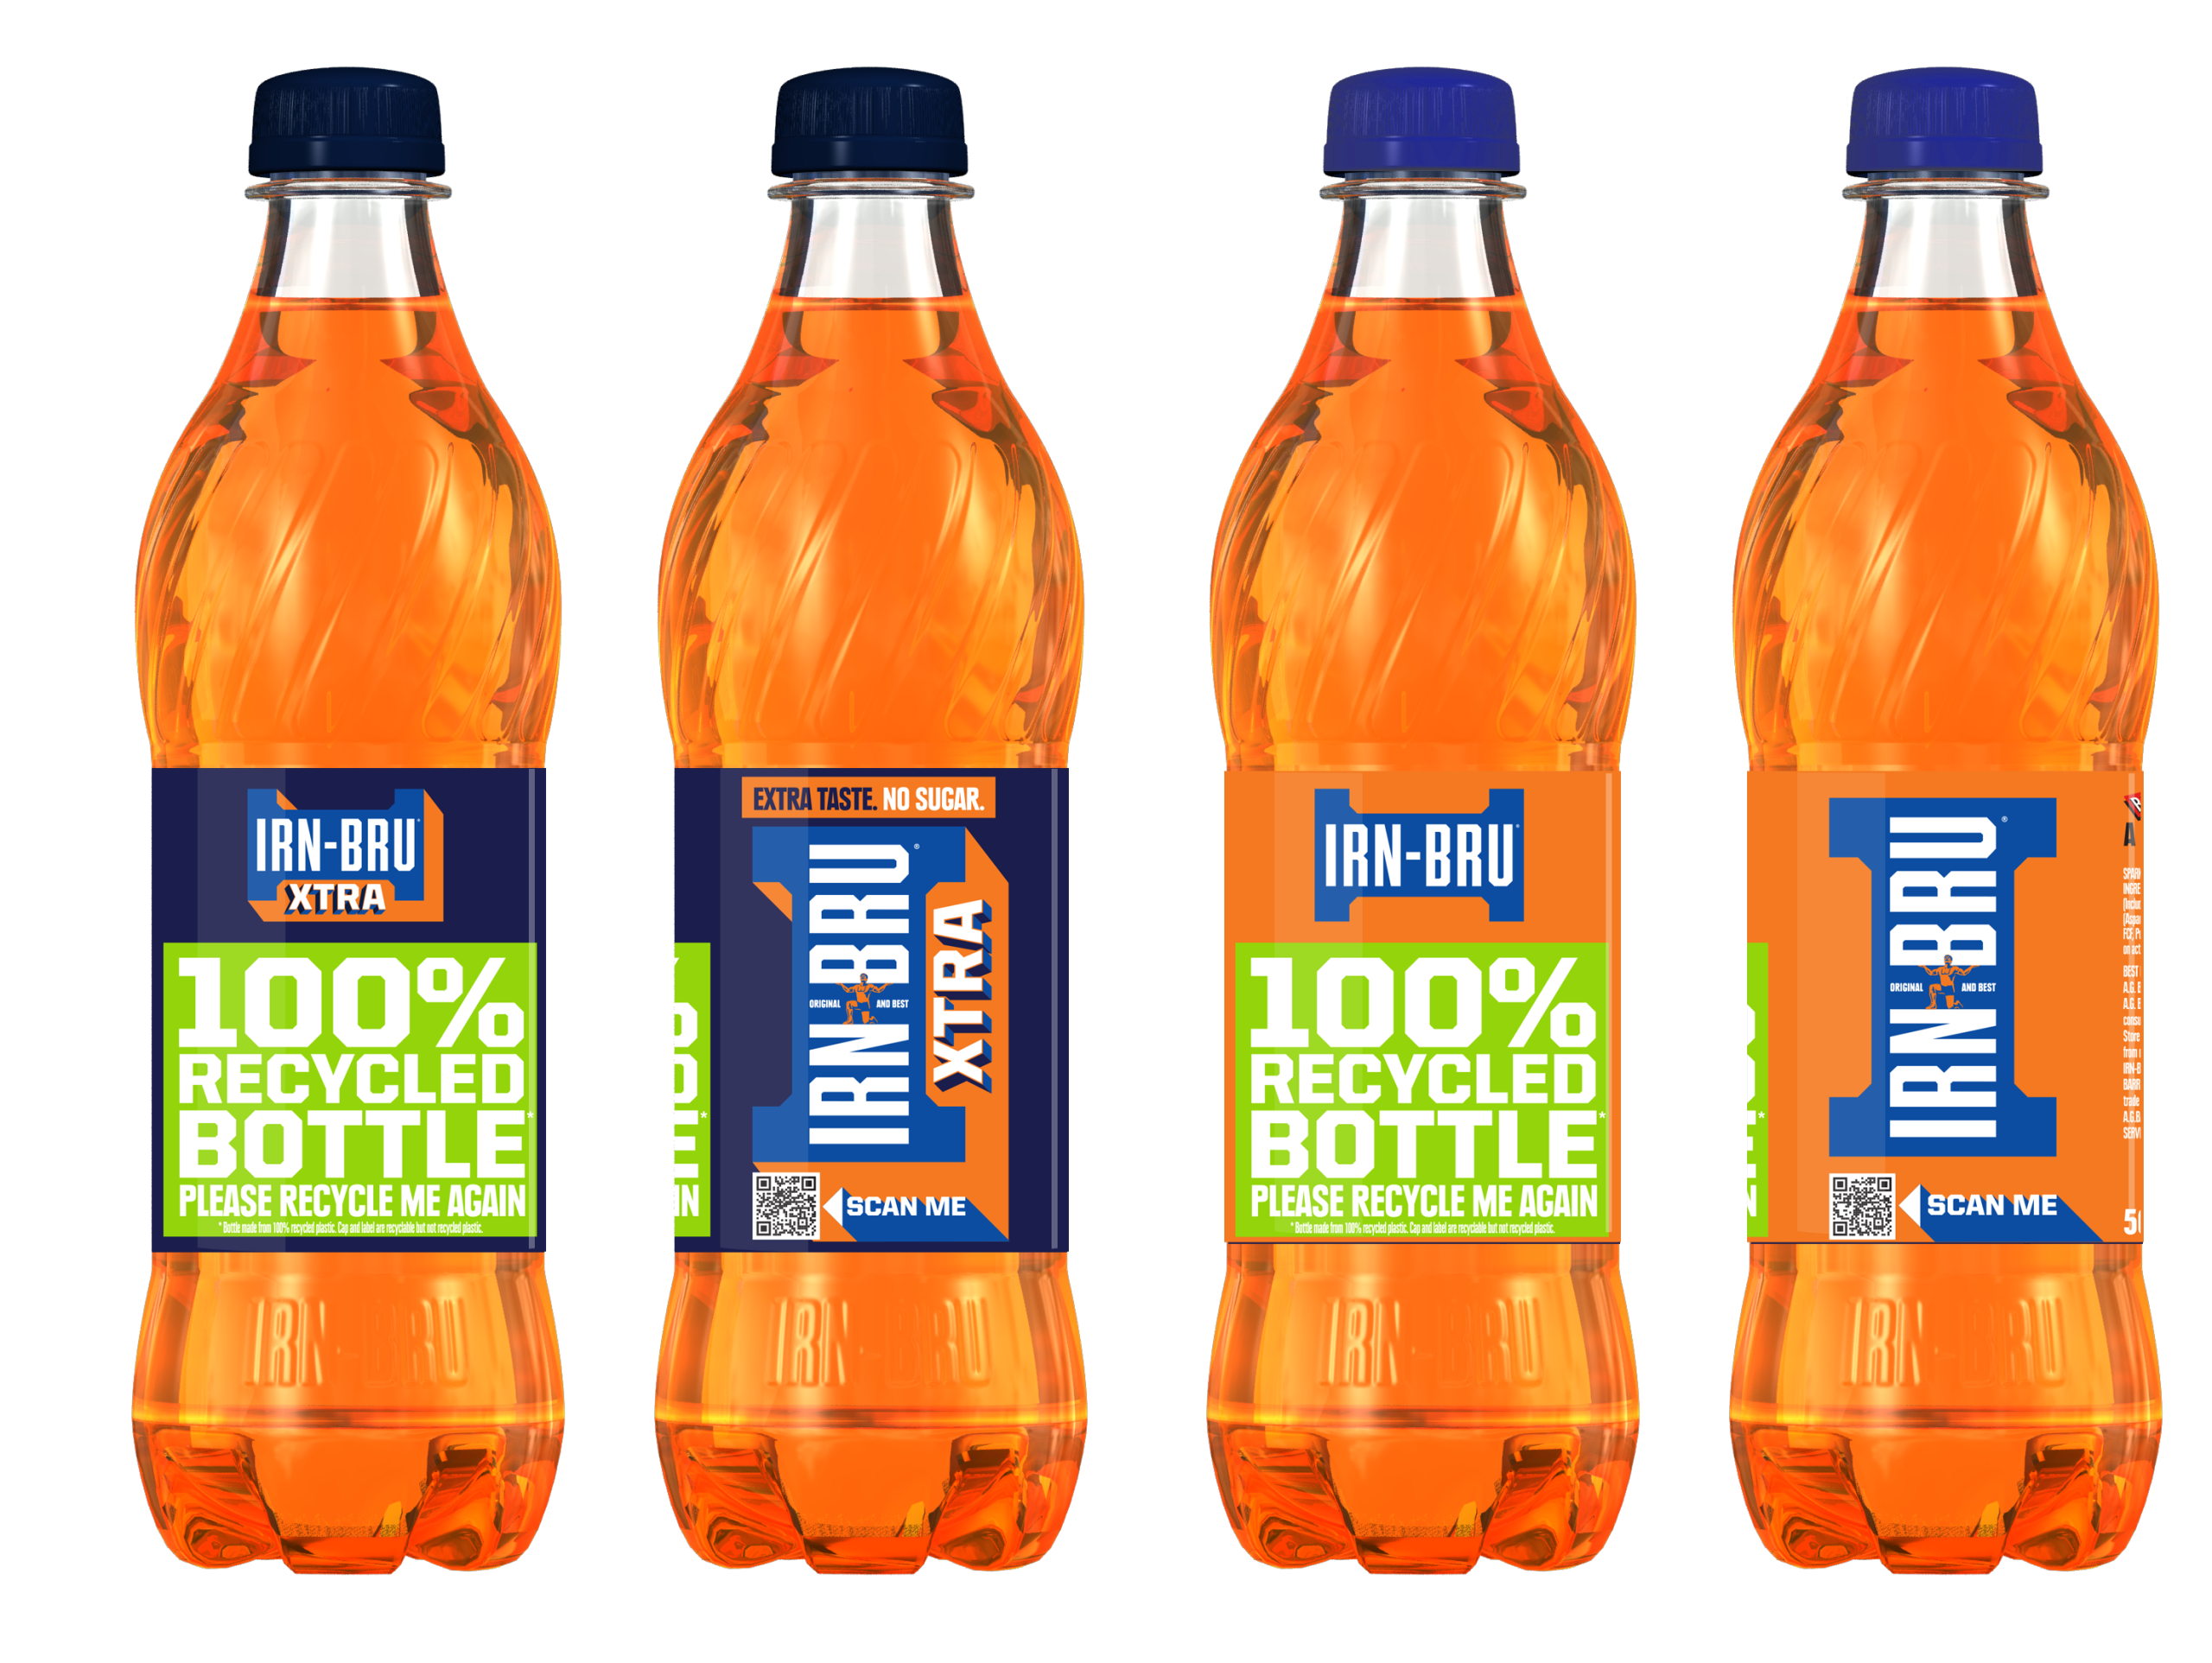 AG Barr goes 100% recycled for 500ml IRN-BRU and Rubicon